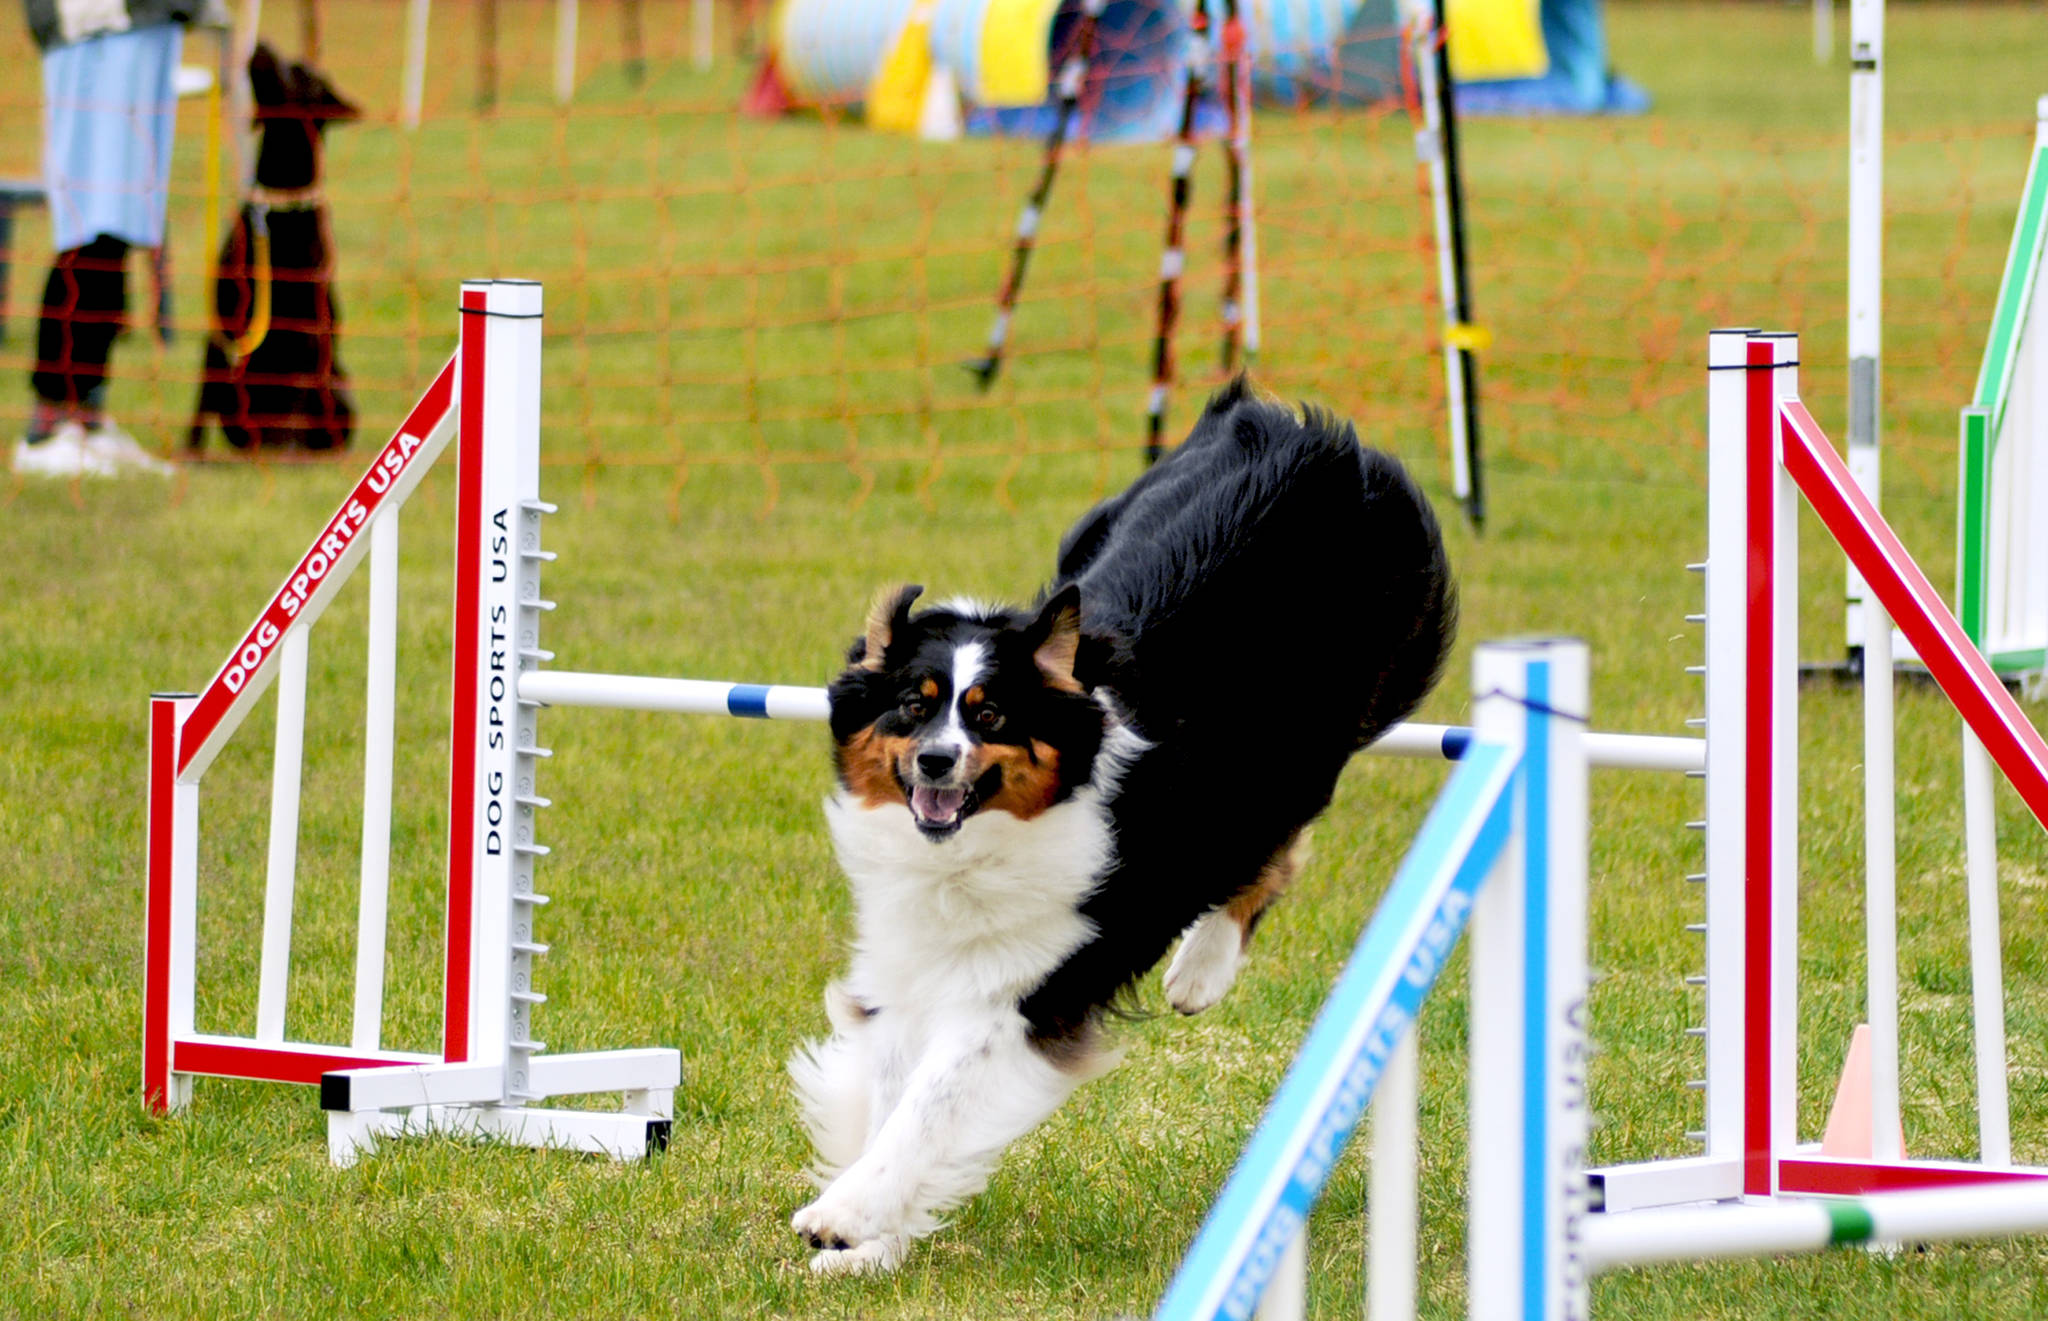 A dog hops over an obstacle during an agility test at the Kenai Kennel Club’s annual dog show, obedience and agility trials on Saturday, July 14, 2018 in Soldotna, Alaska. Dog owners come from all over the state to take part in the events each year. (Photo by Elizabeth Earl/Peninsula Clarion)